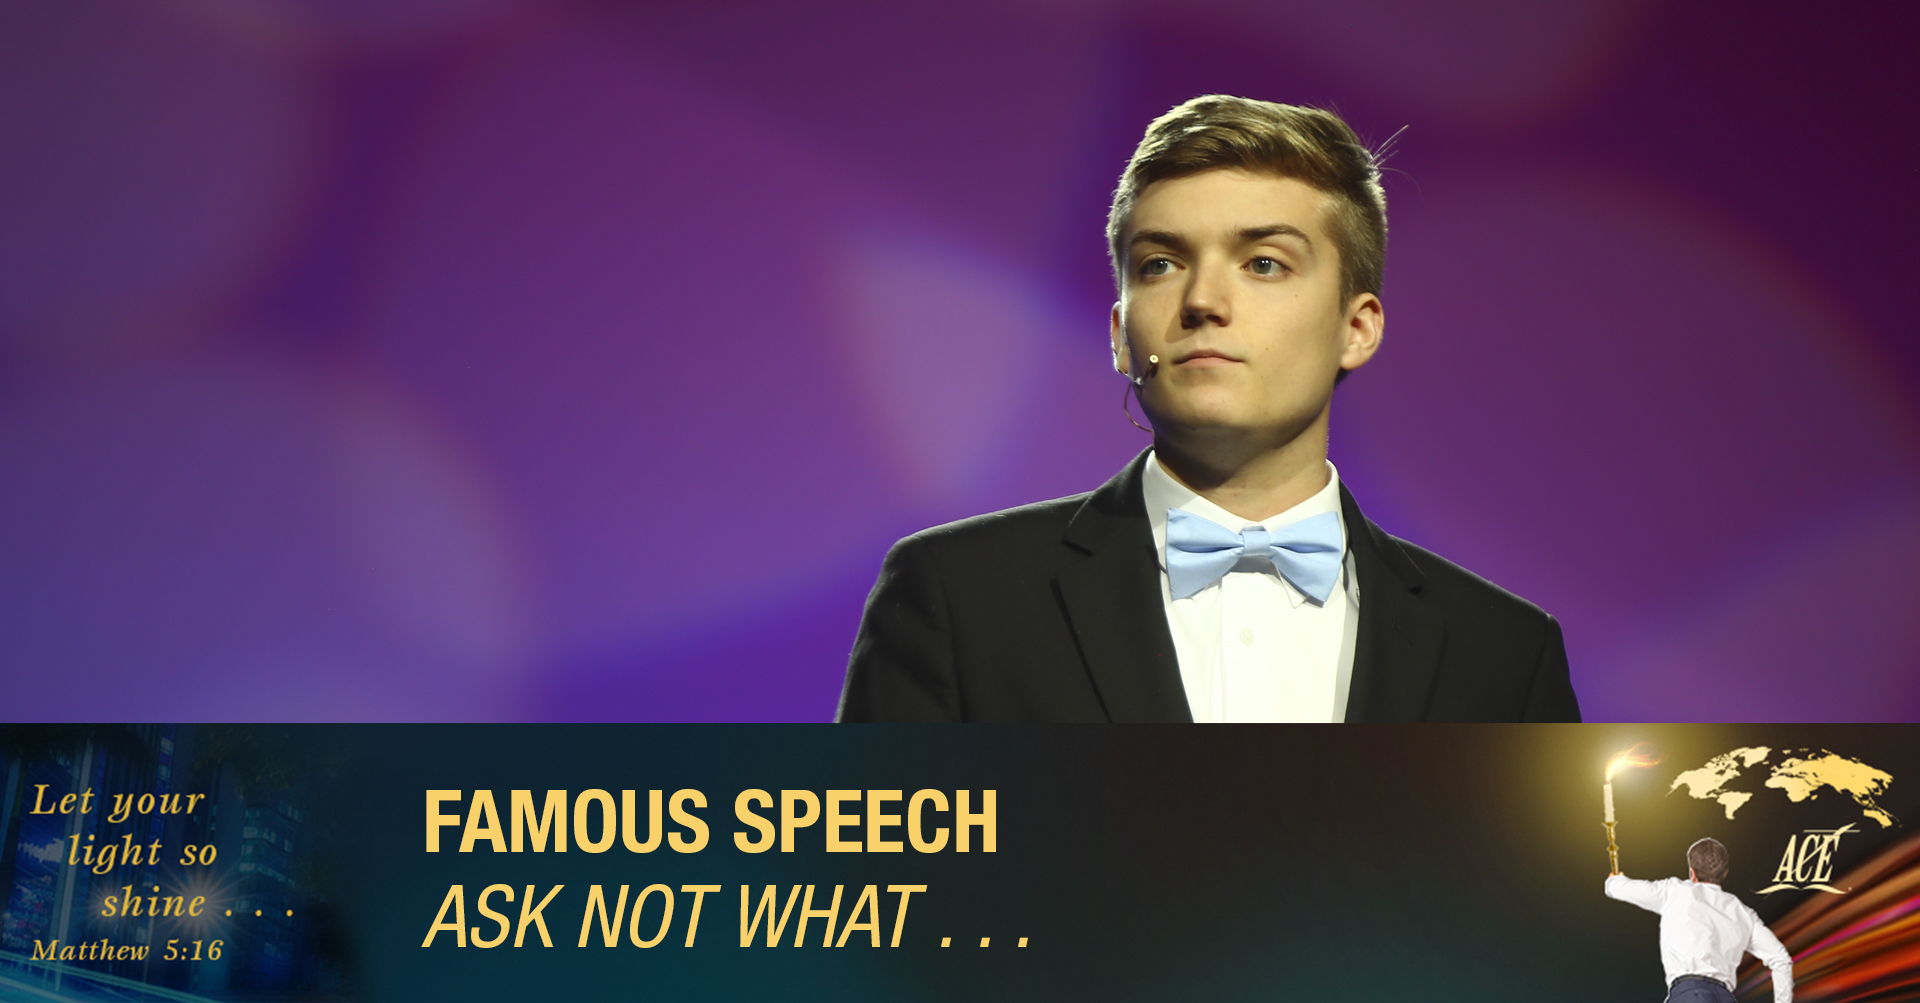 Famous Speech, "Ask Not What" - ISC 2019